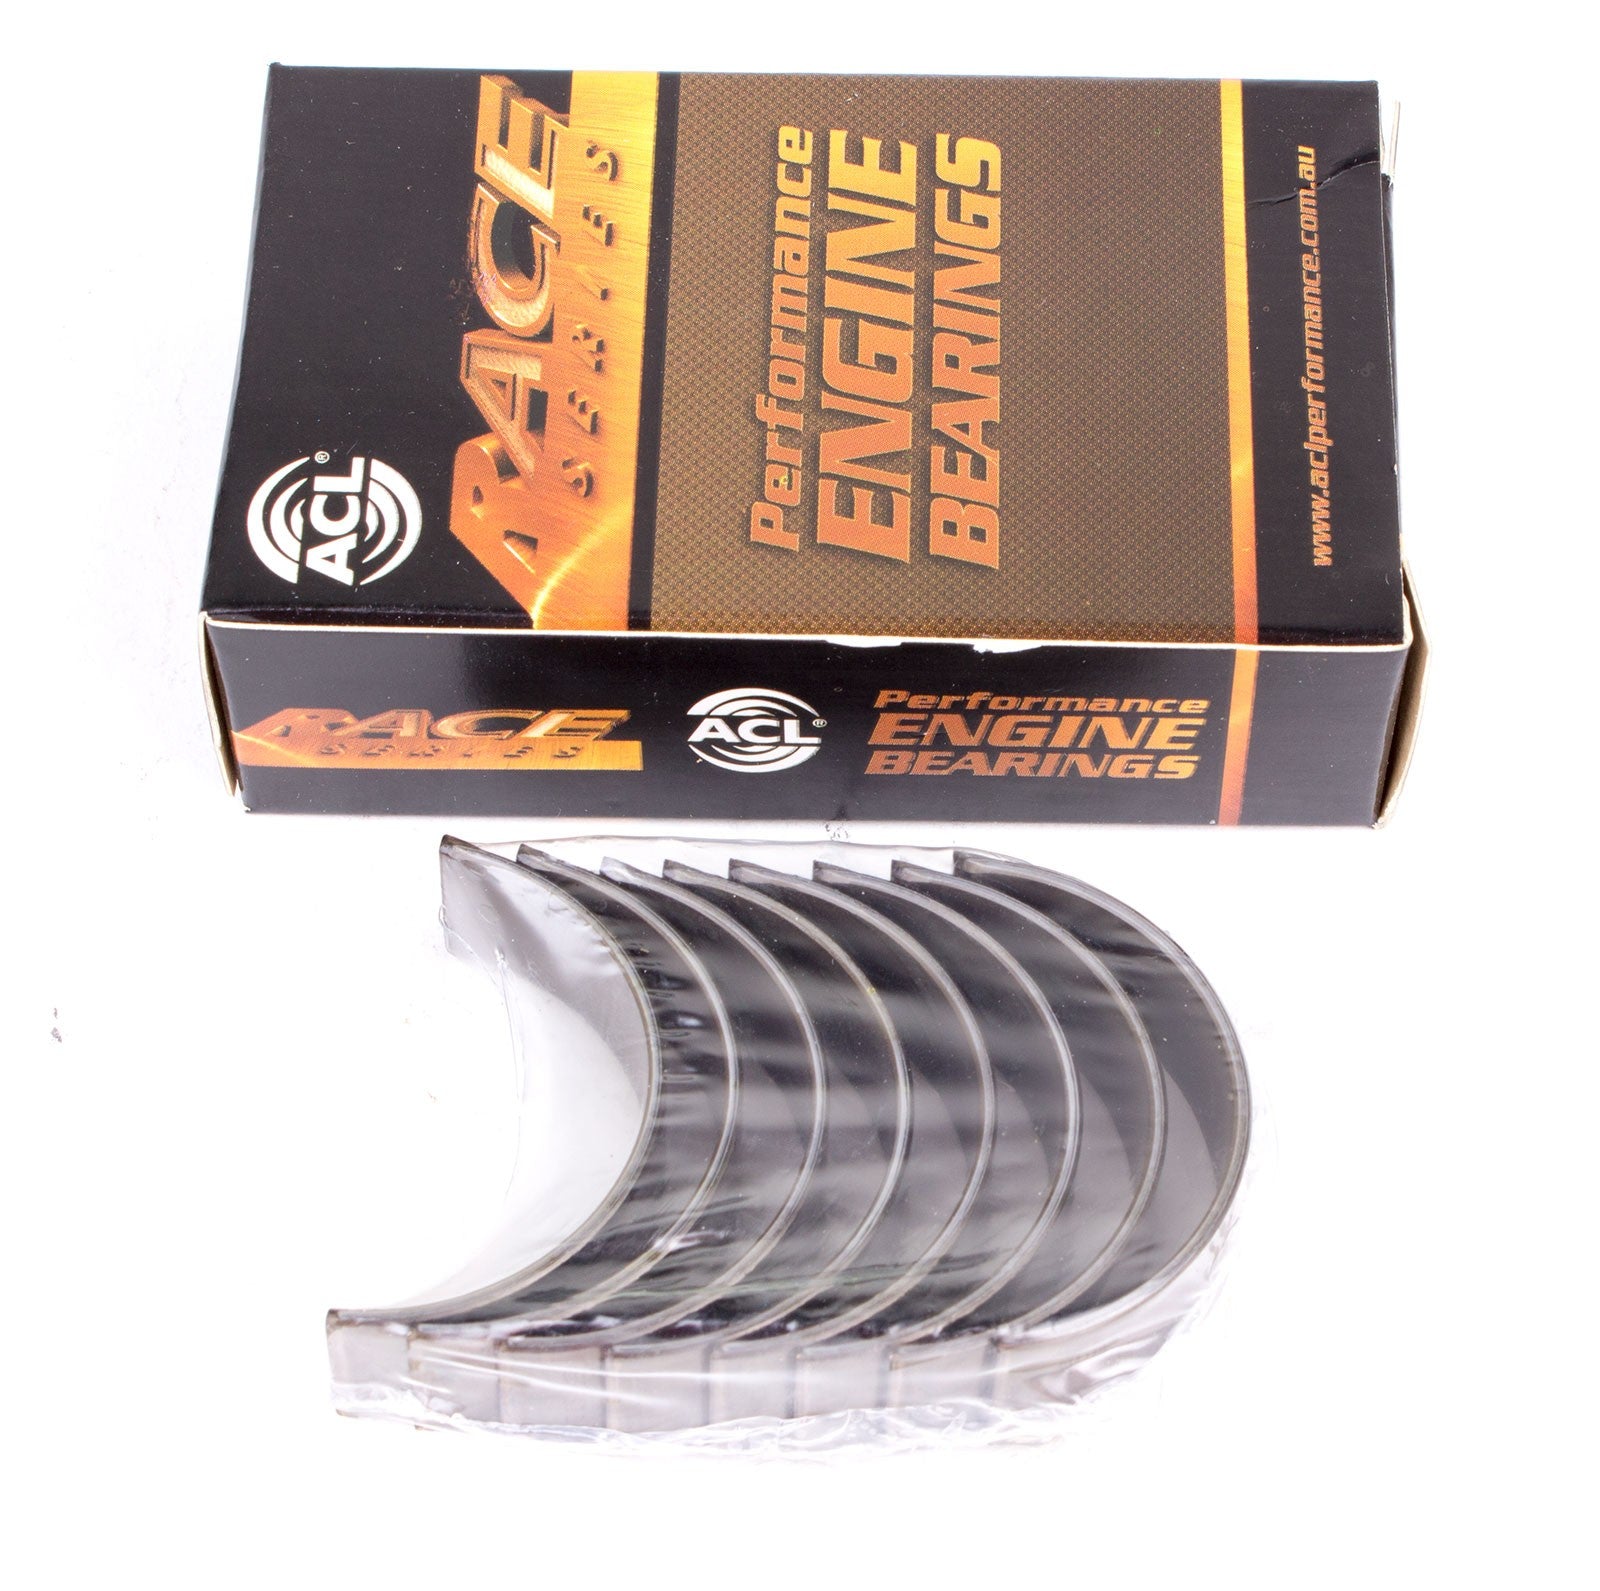 ACL 5M7297H-010 Main bearing set (ACL Race Series) Photo-0 